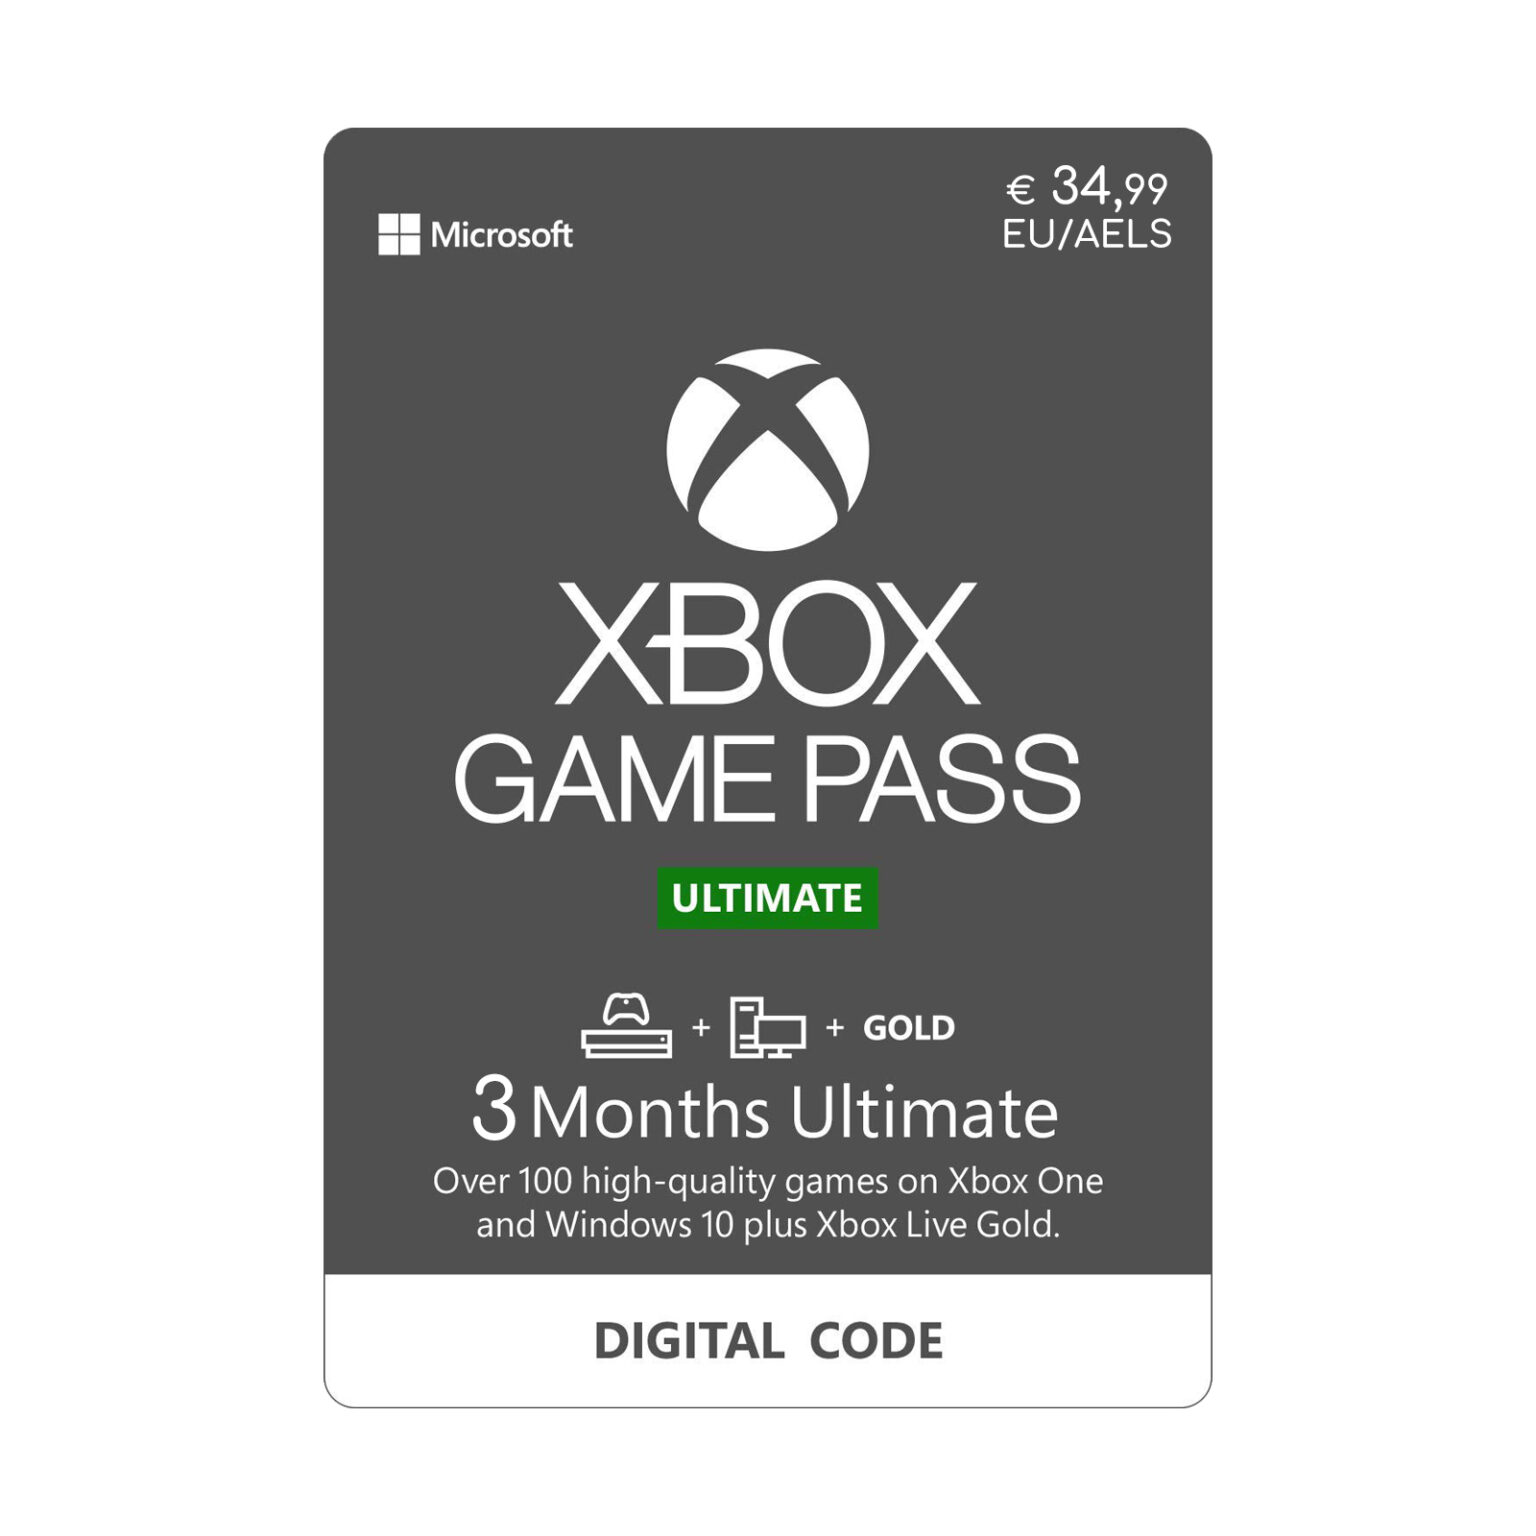 what is the cost of xbox ultimate game pass